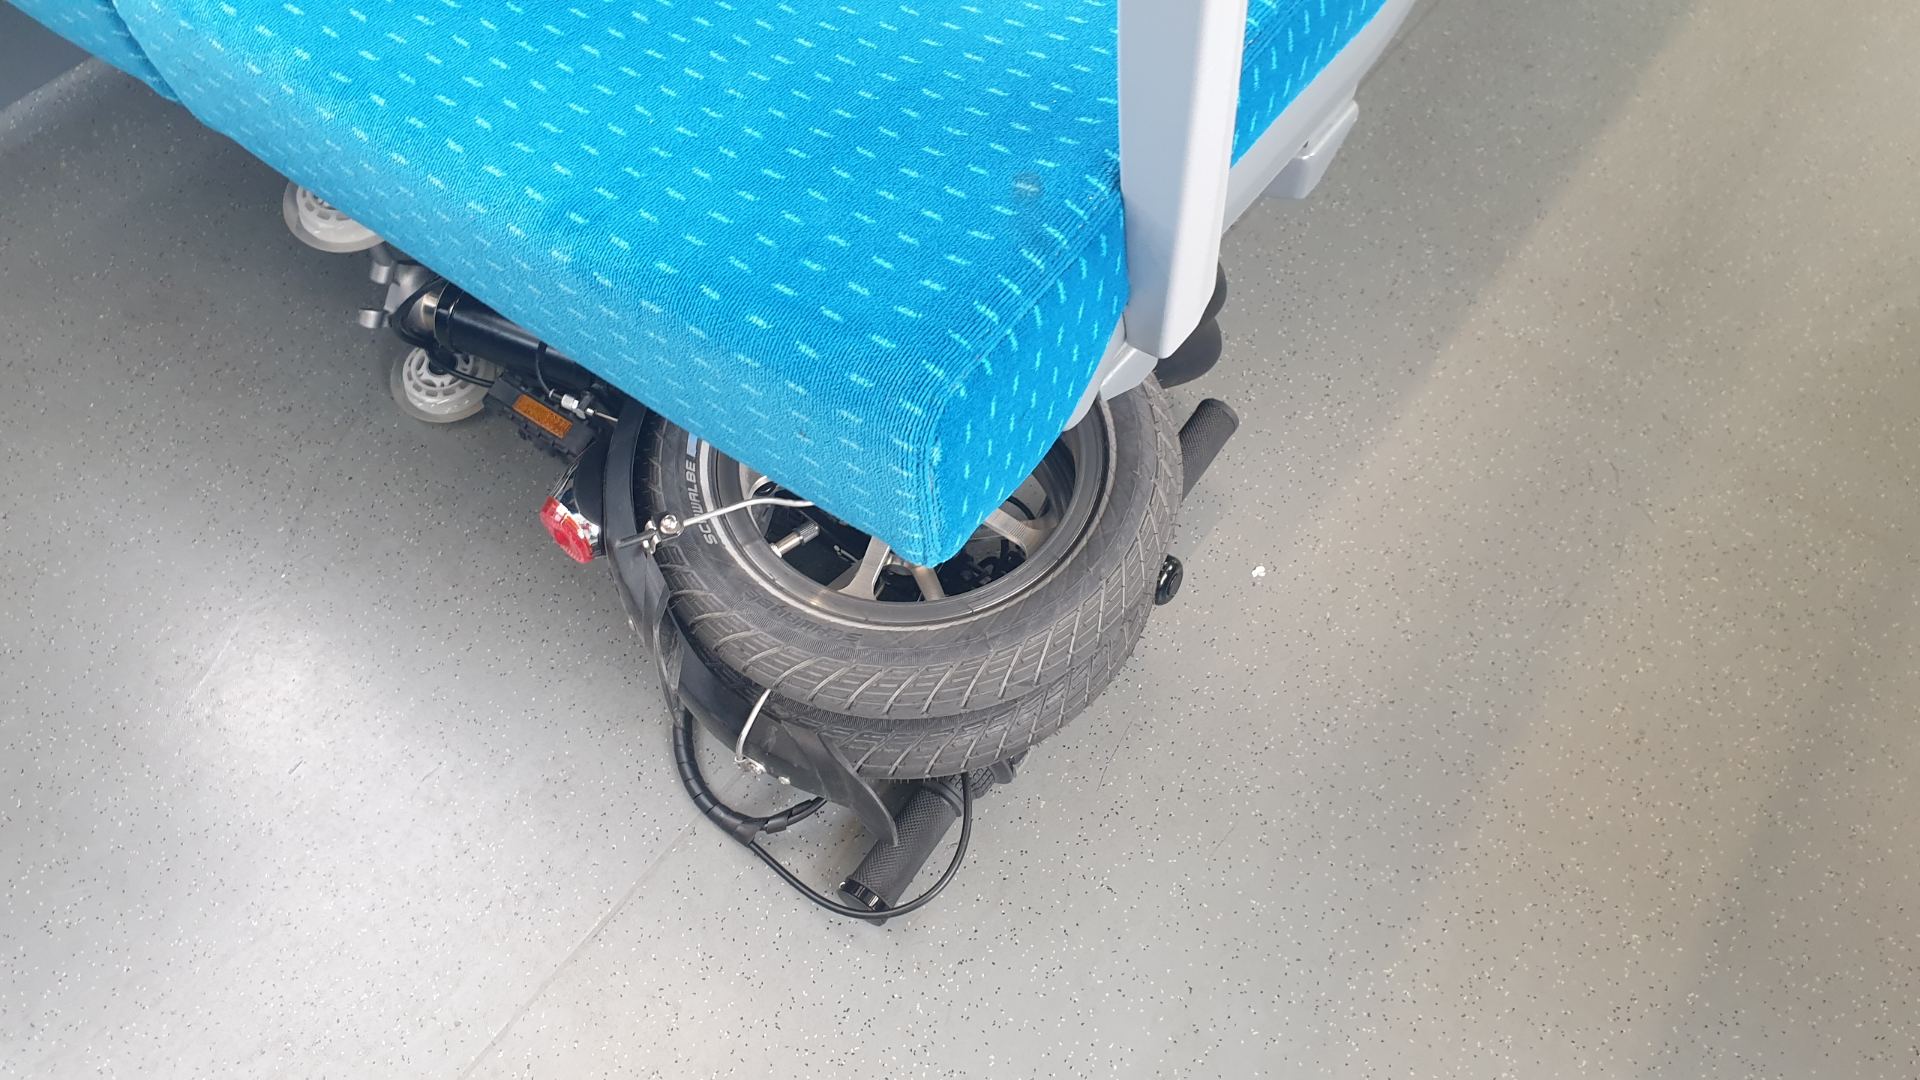 Folding-Kwiggle-under-the-seat-in-the-train